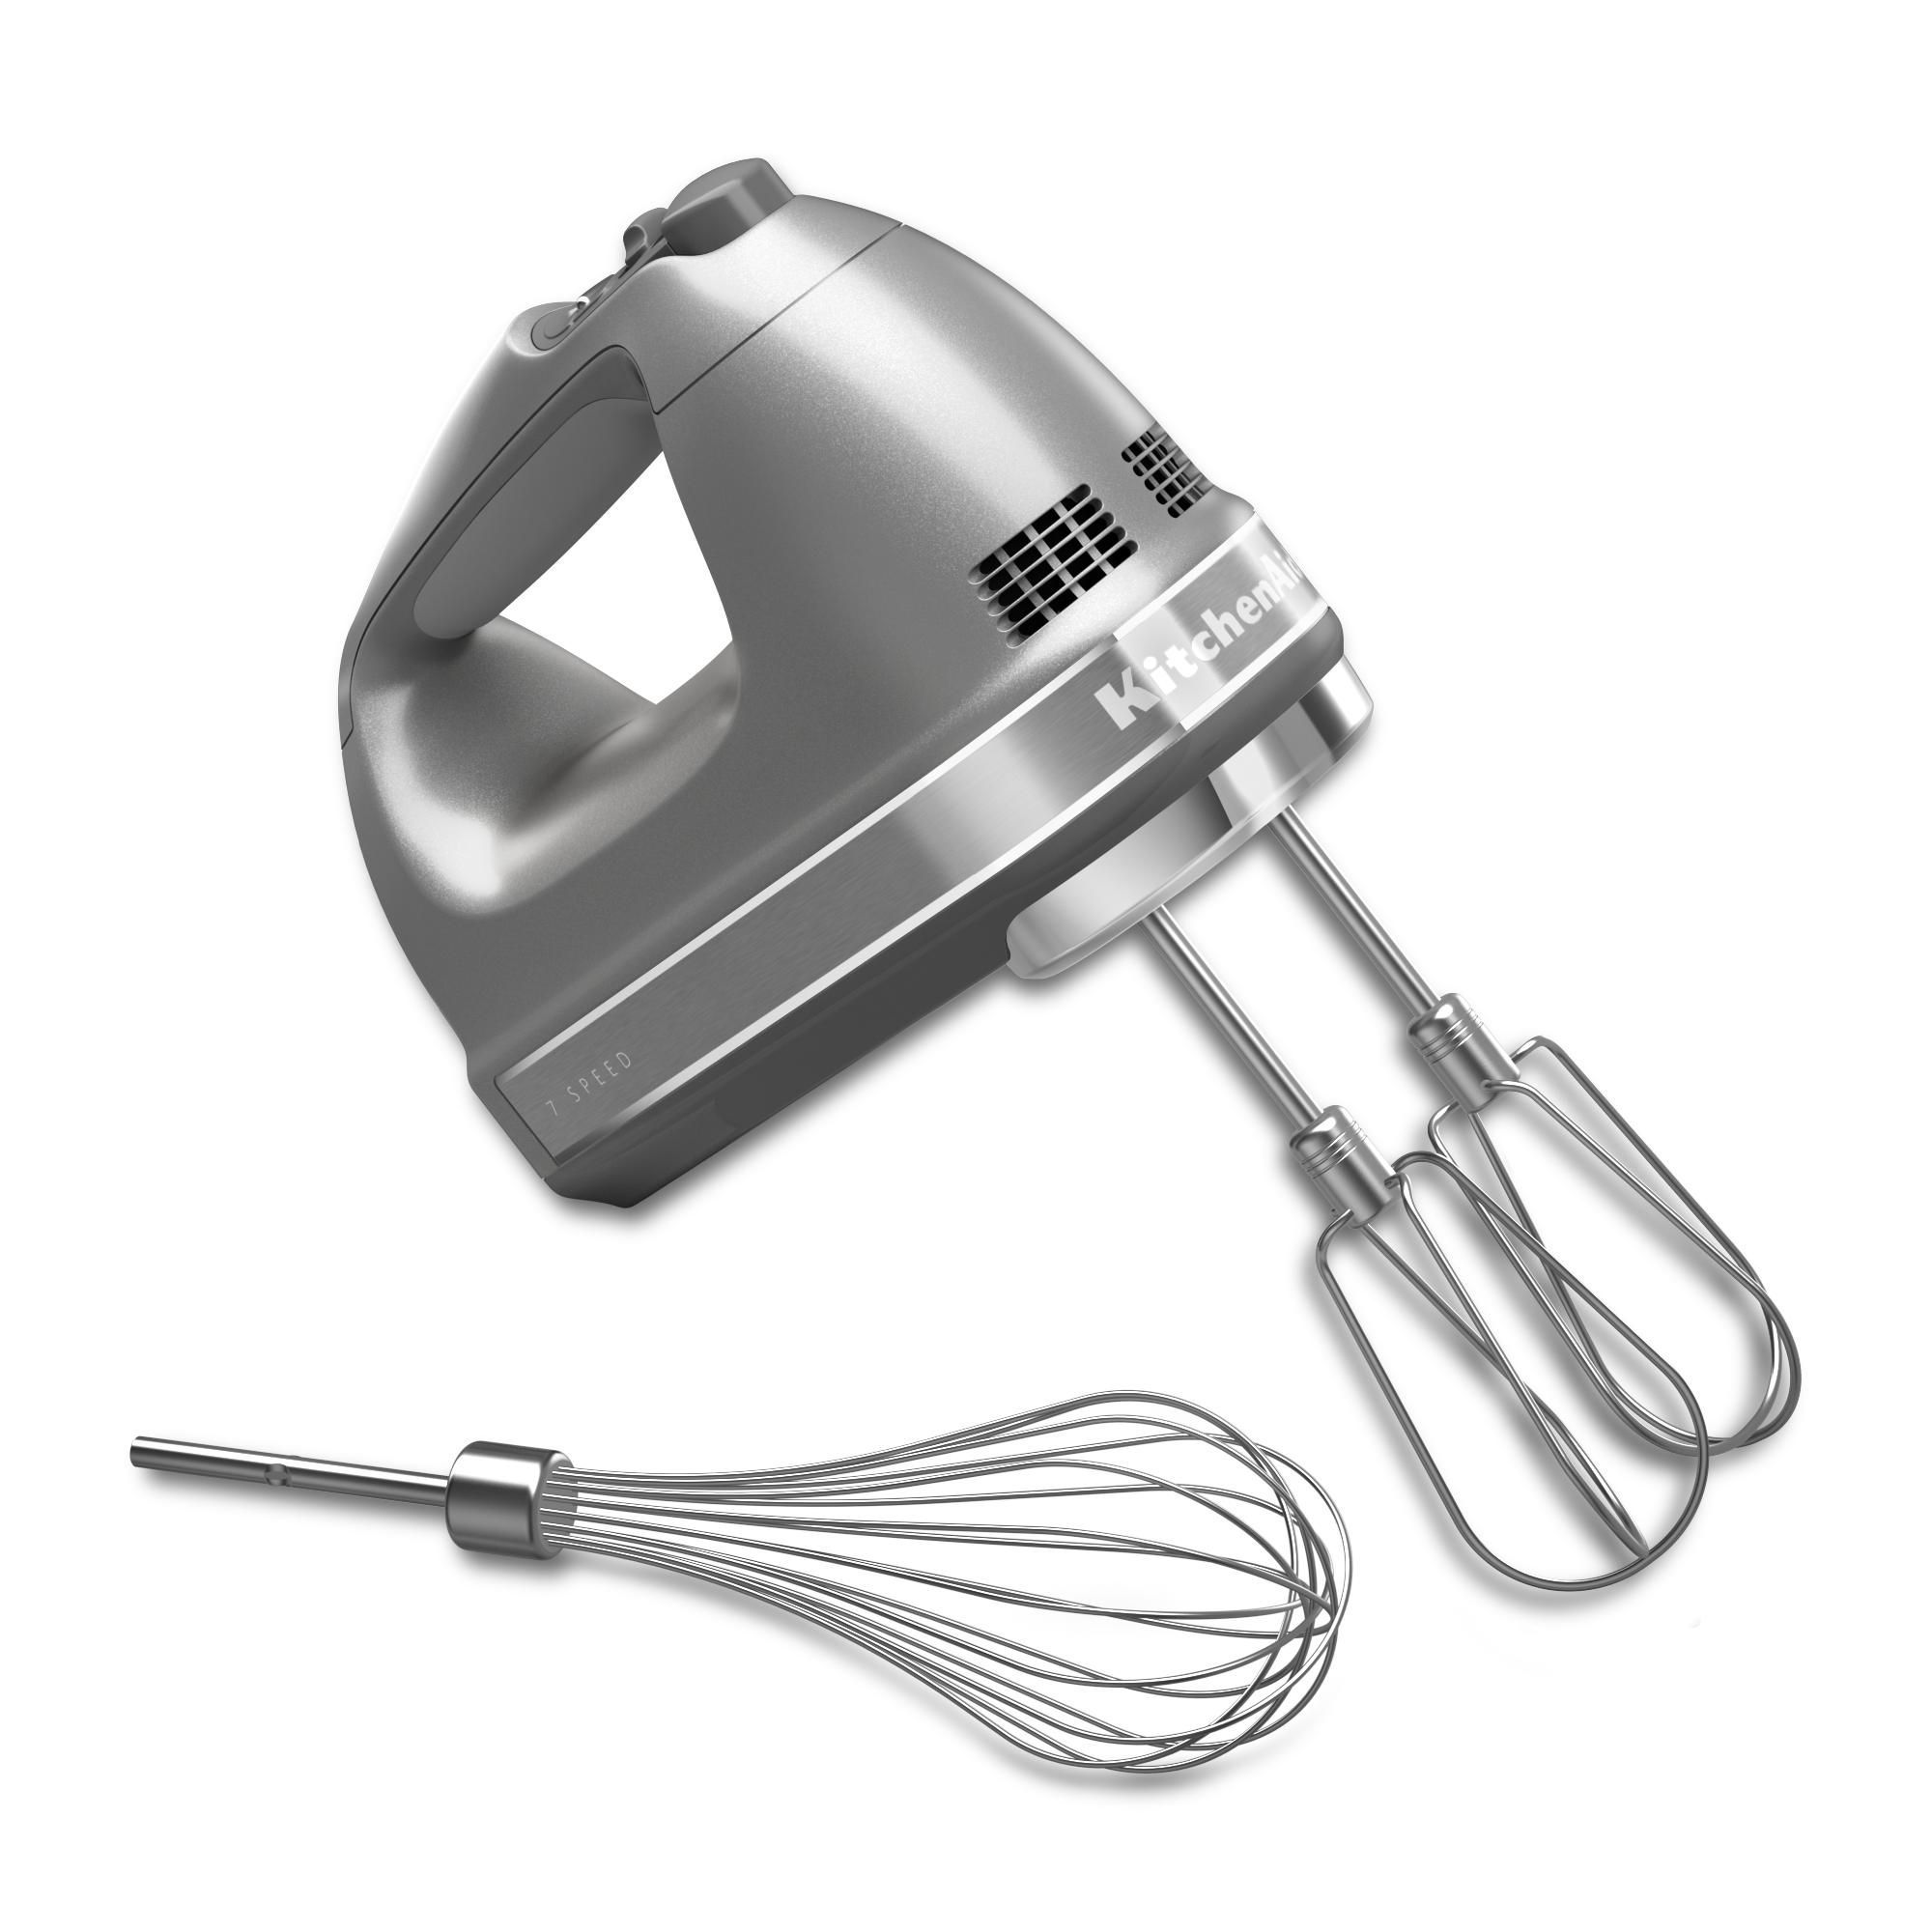 Continental Electric 5 Speed Hand Mixer, White